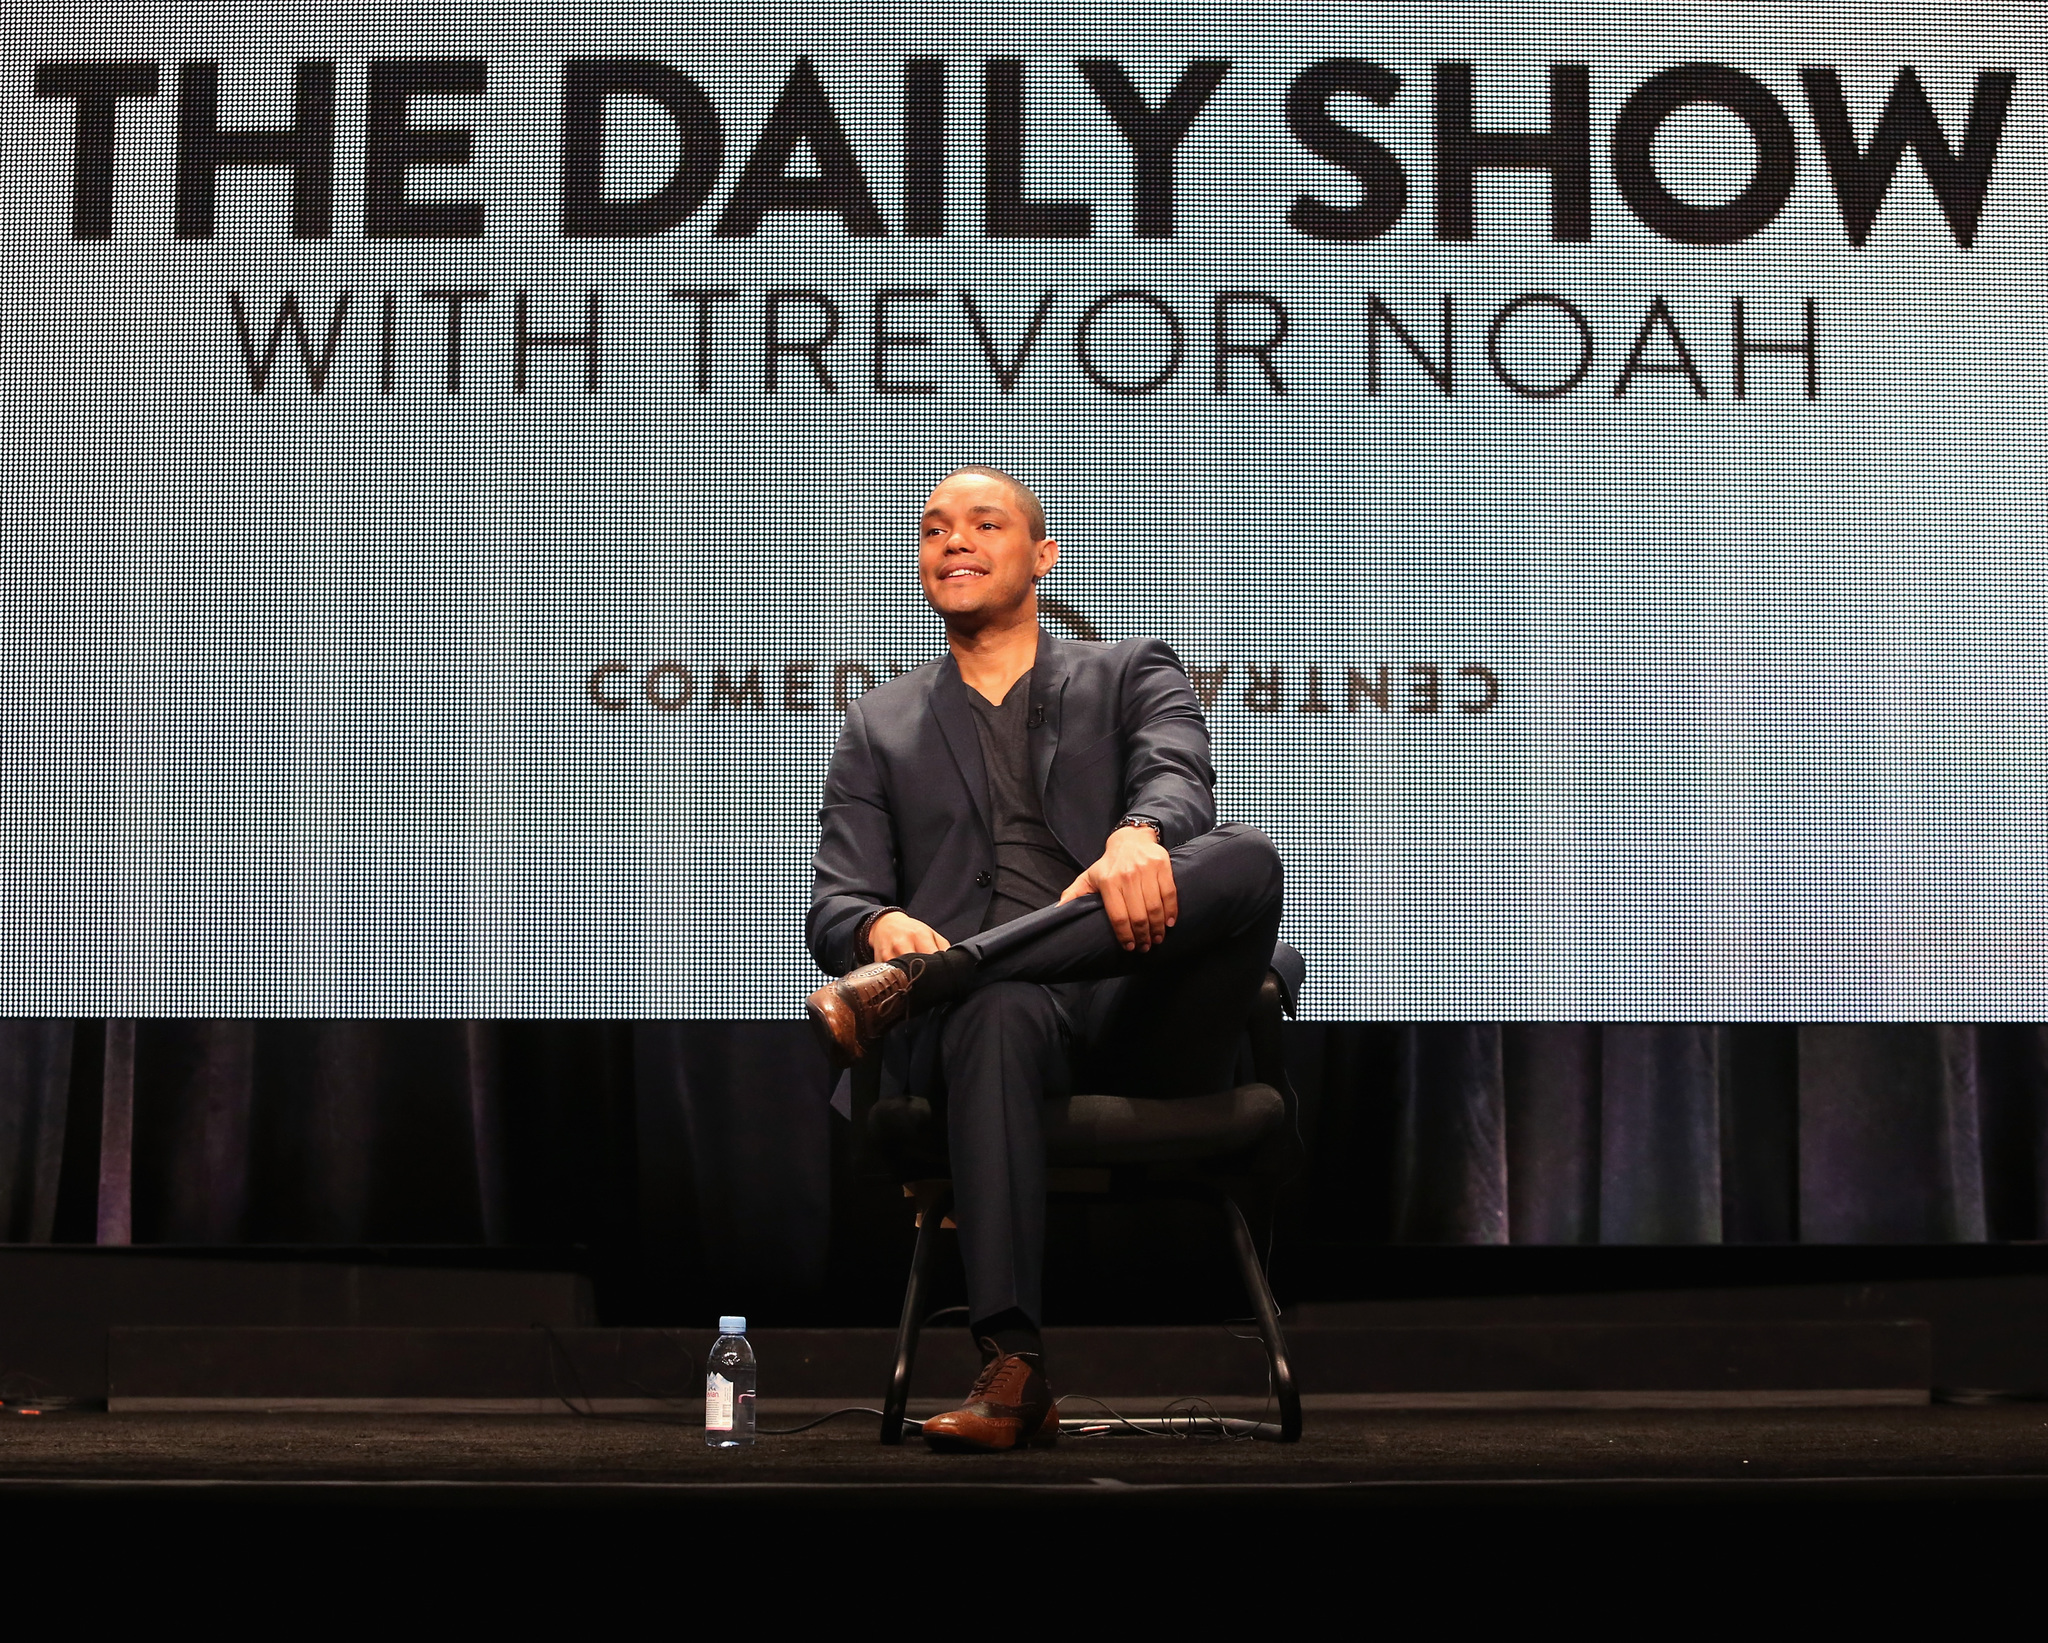 Trevor Noah at event of The Daily Show (1996)